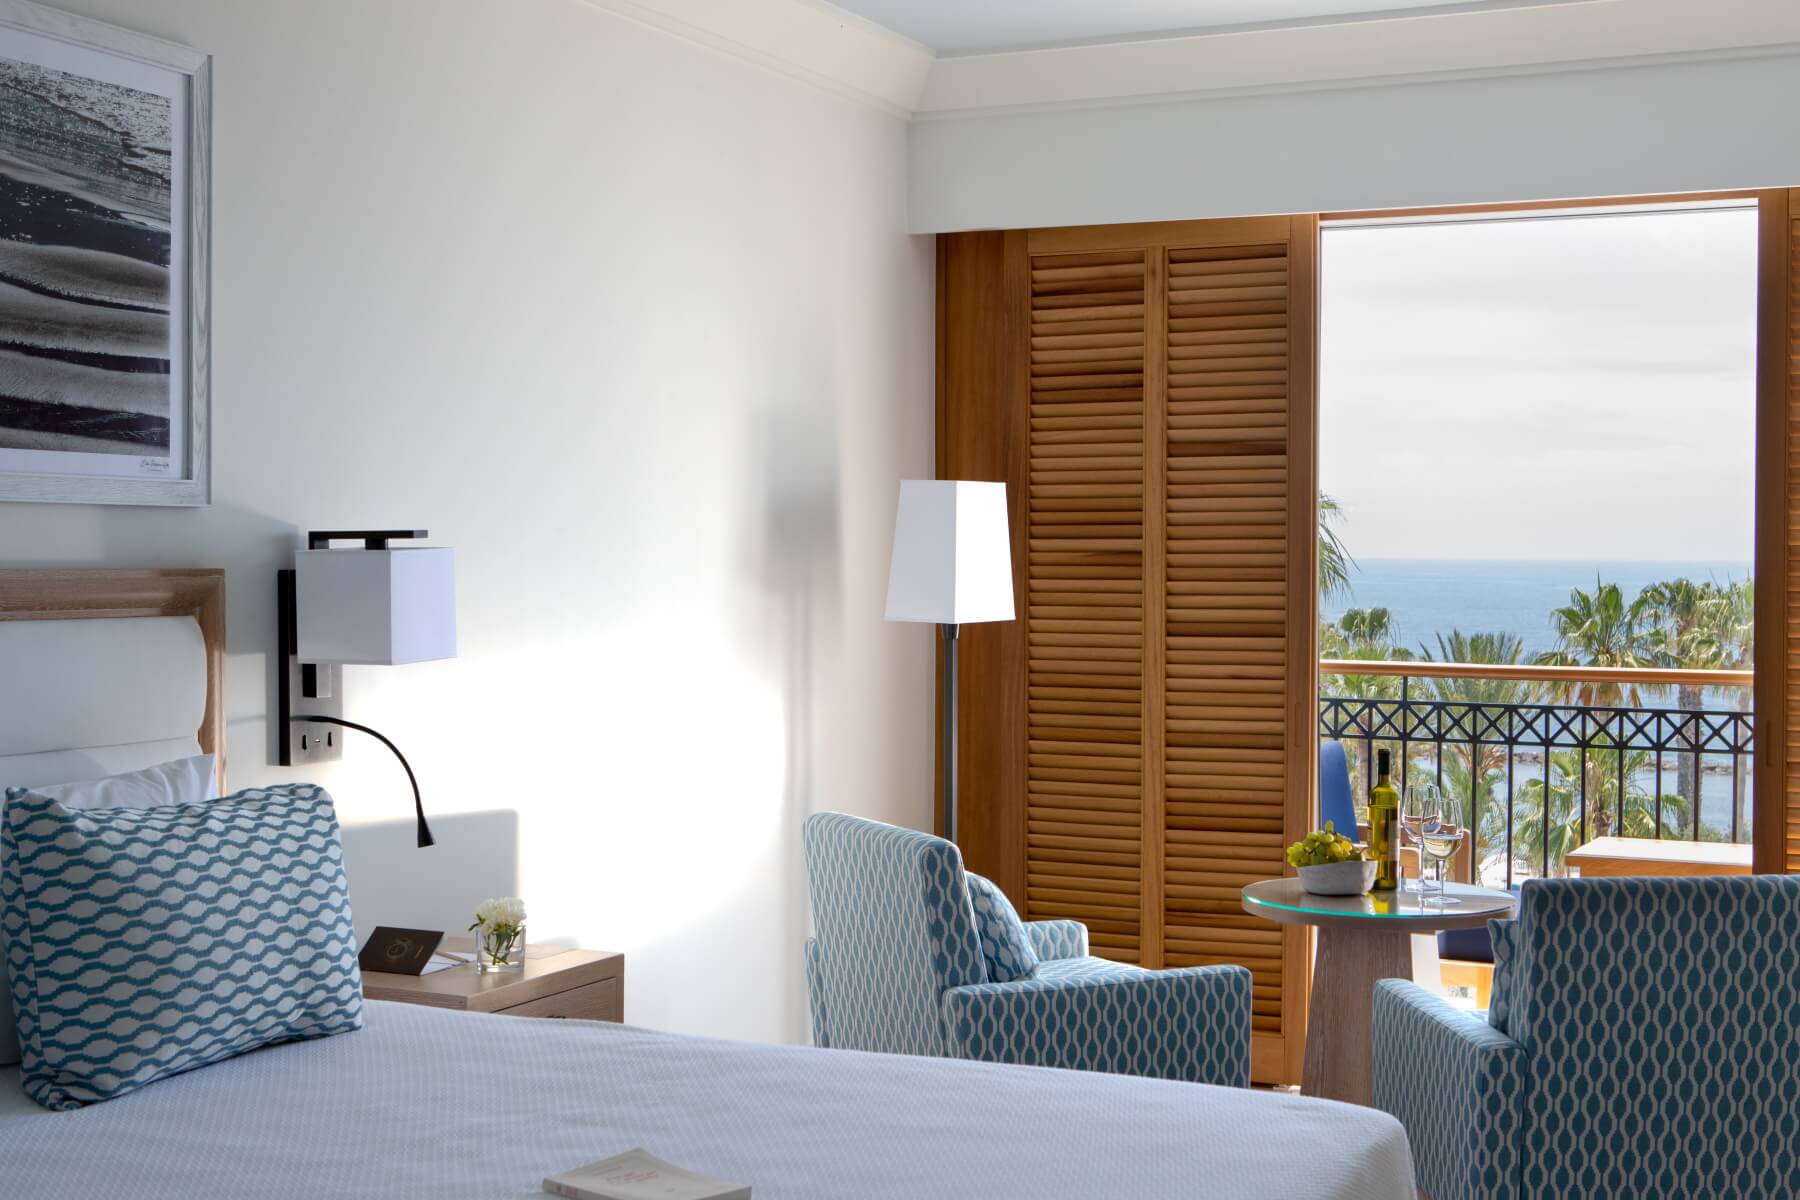 Annabelle Hotel - Panorama Sea View Room